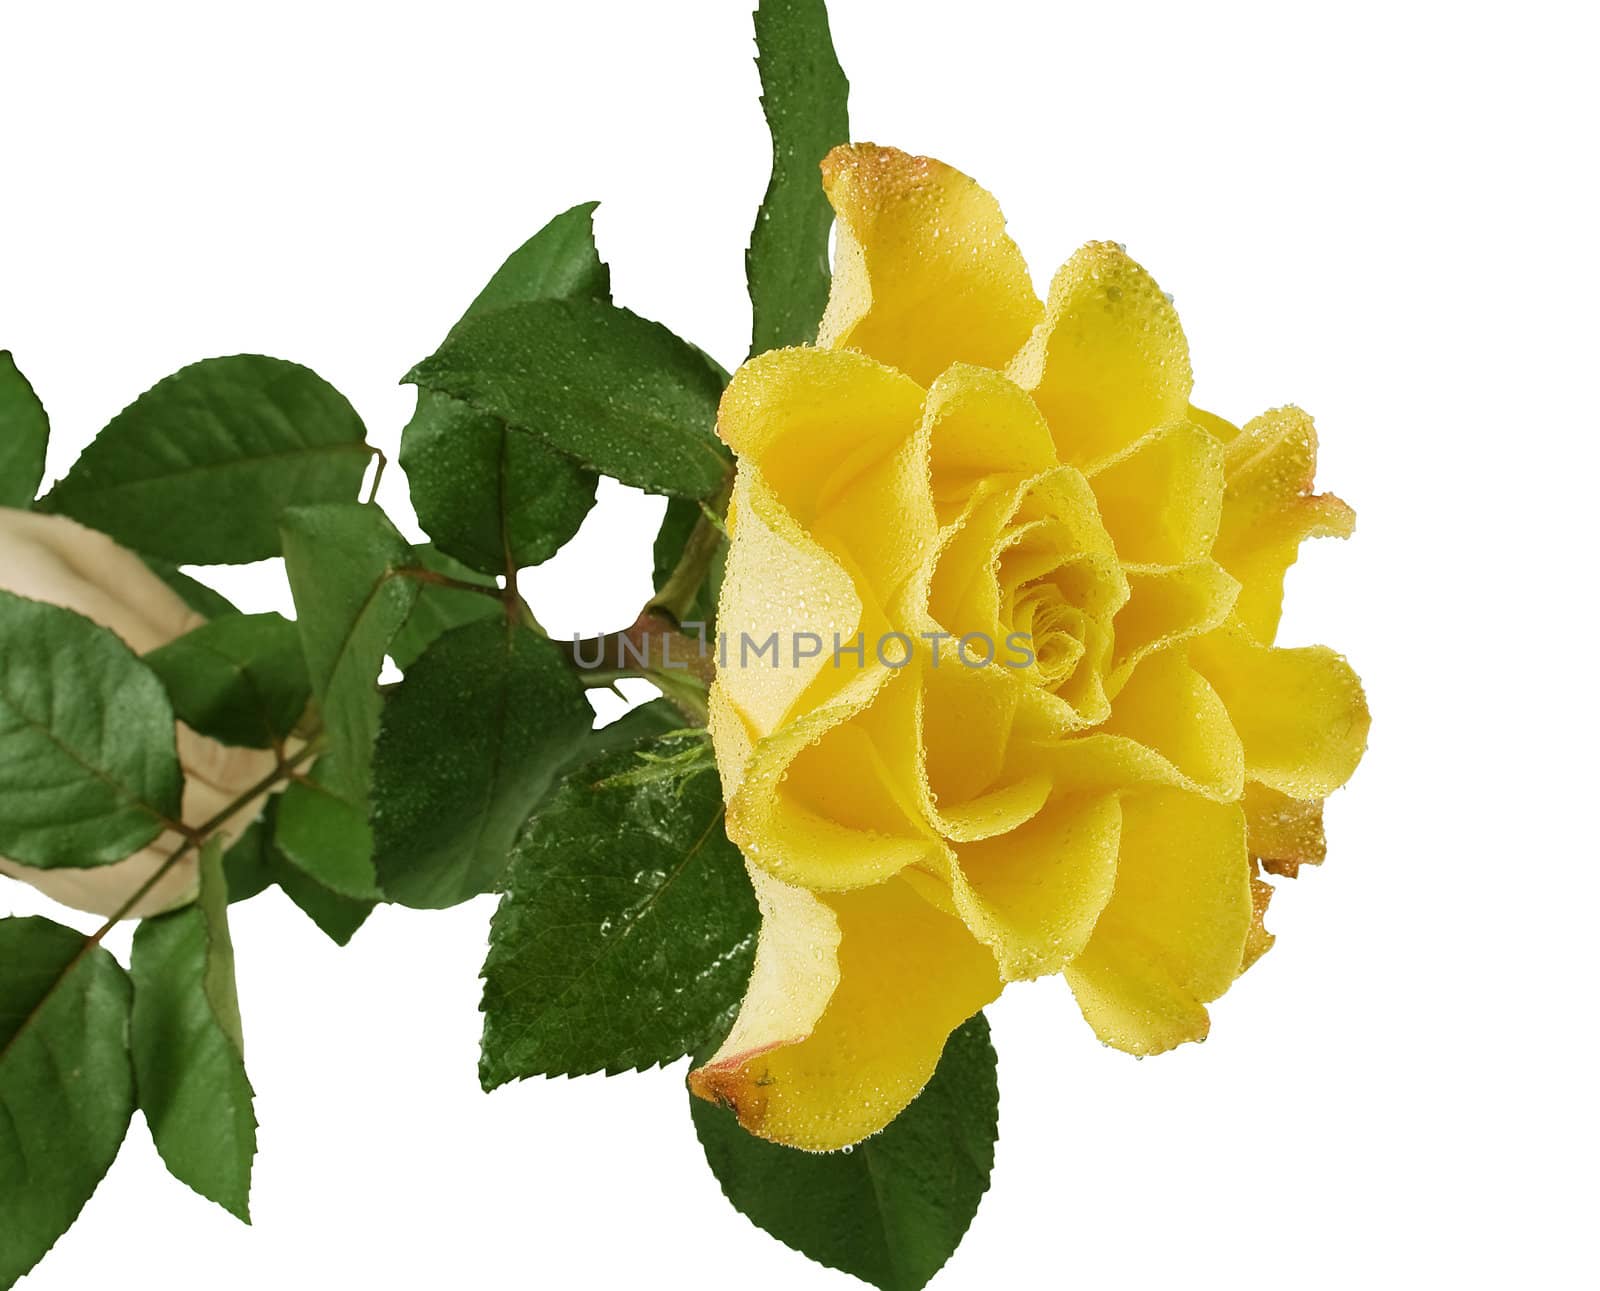 Yellow rose with green leafes on the whitw background